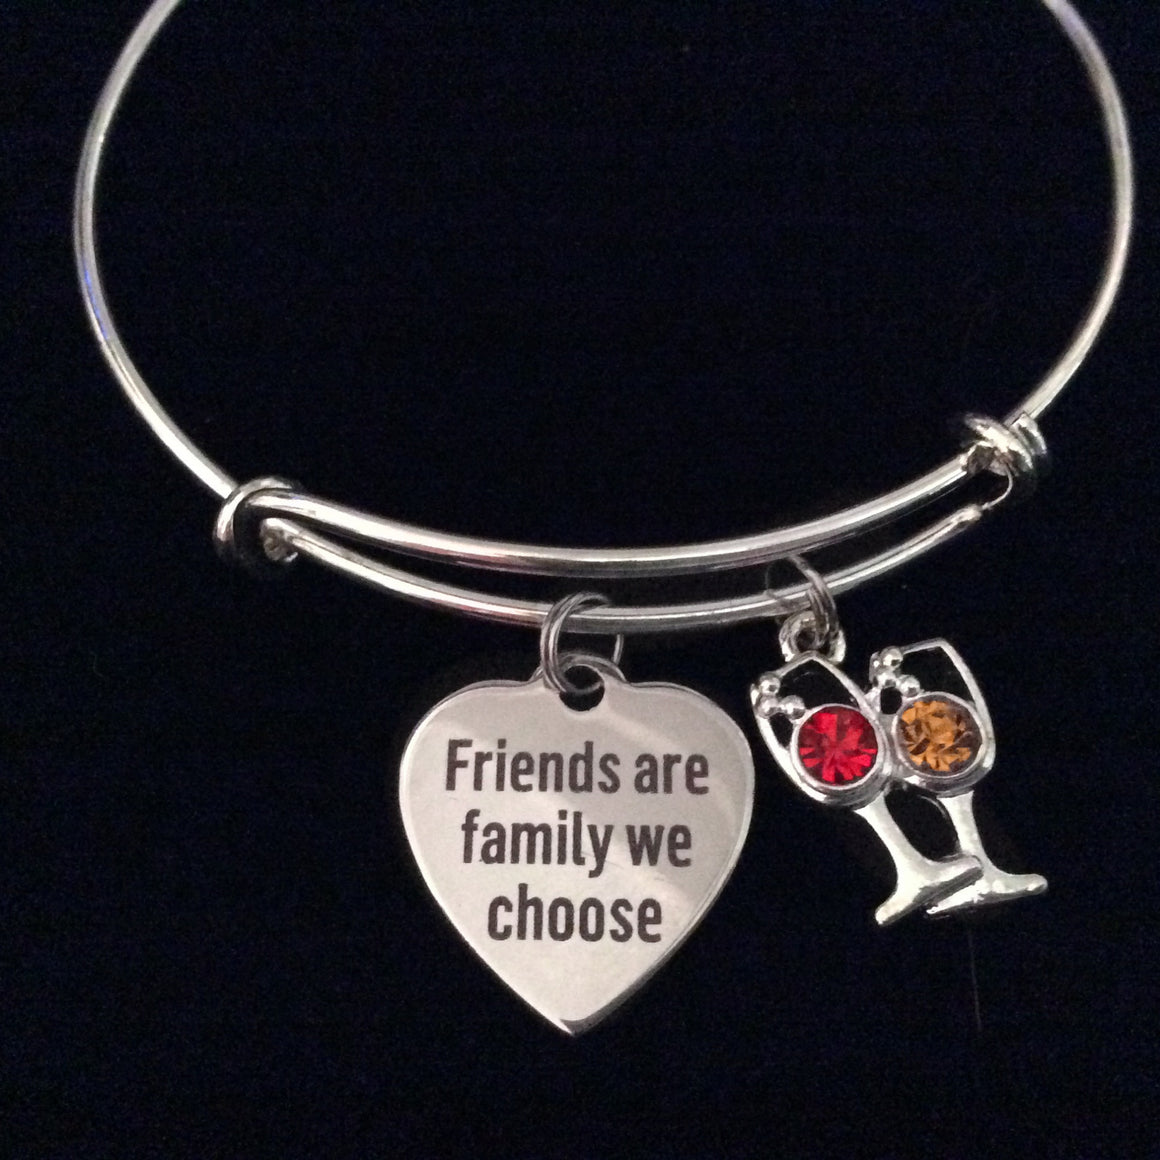 Friends are Family We Choose Silver Expandable Charm Bracelet Wine Glasses Adjustable Bangle BFF Gift